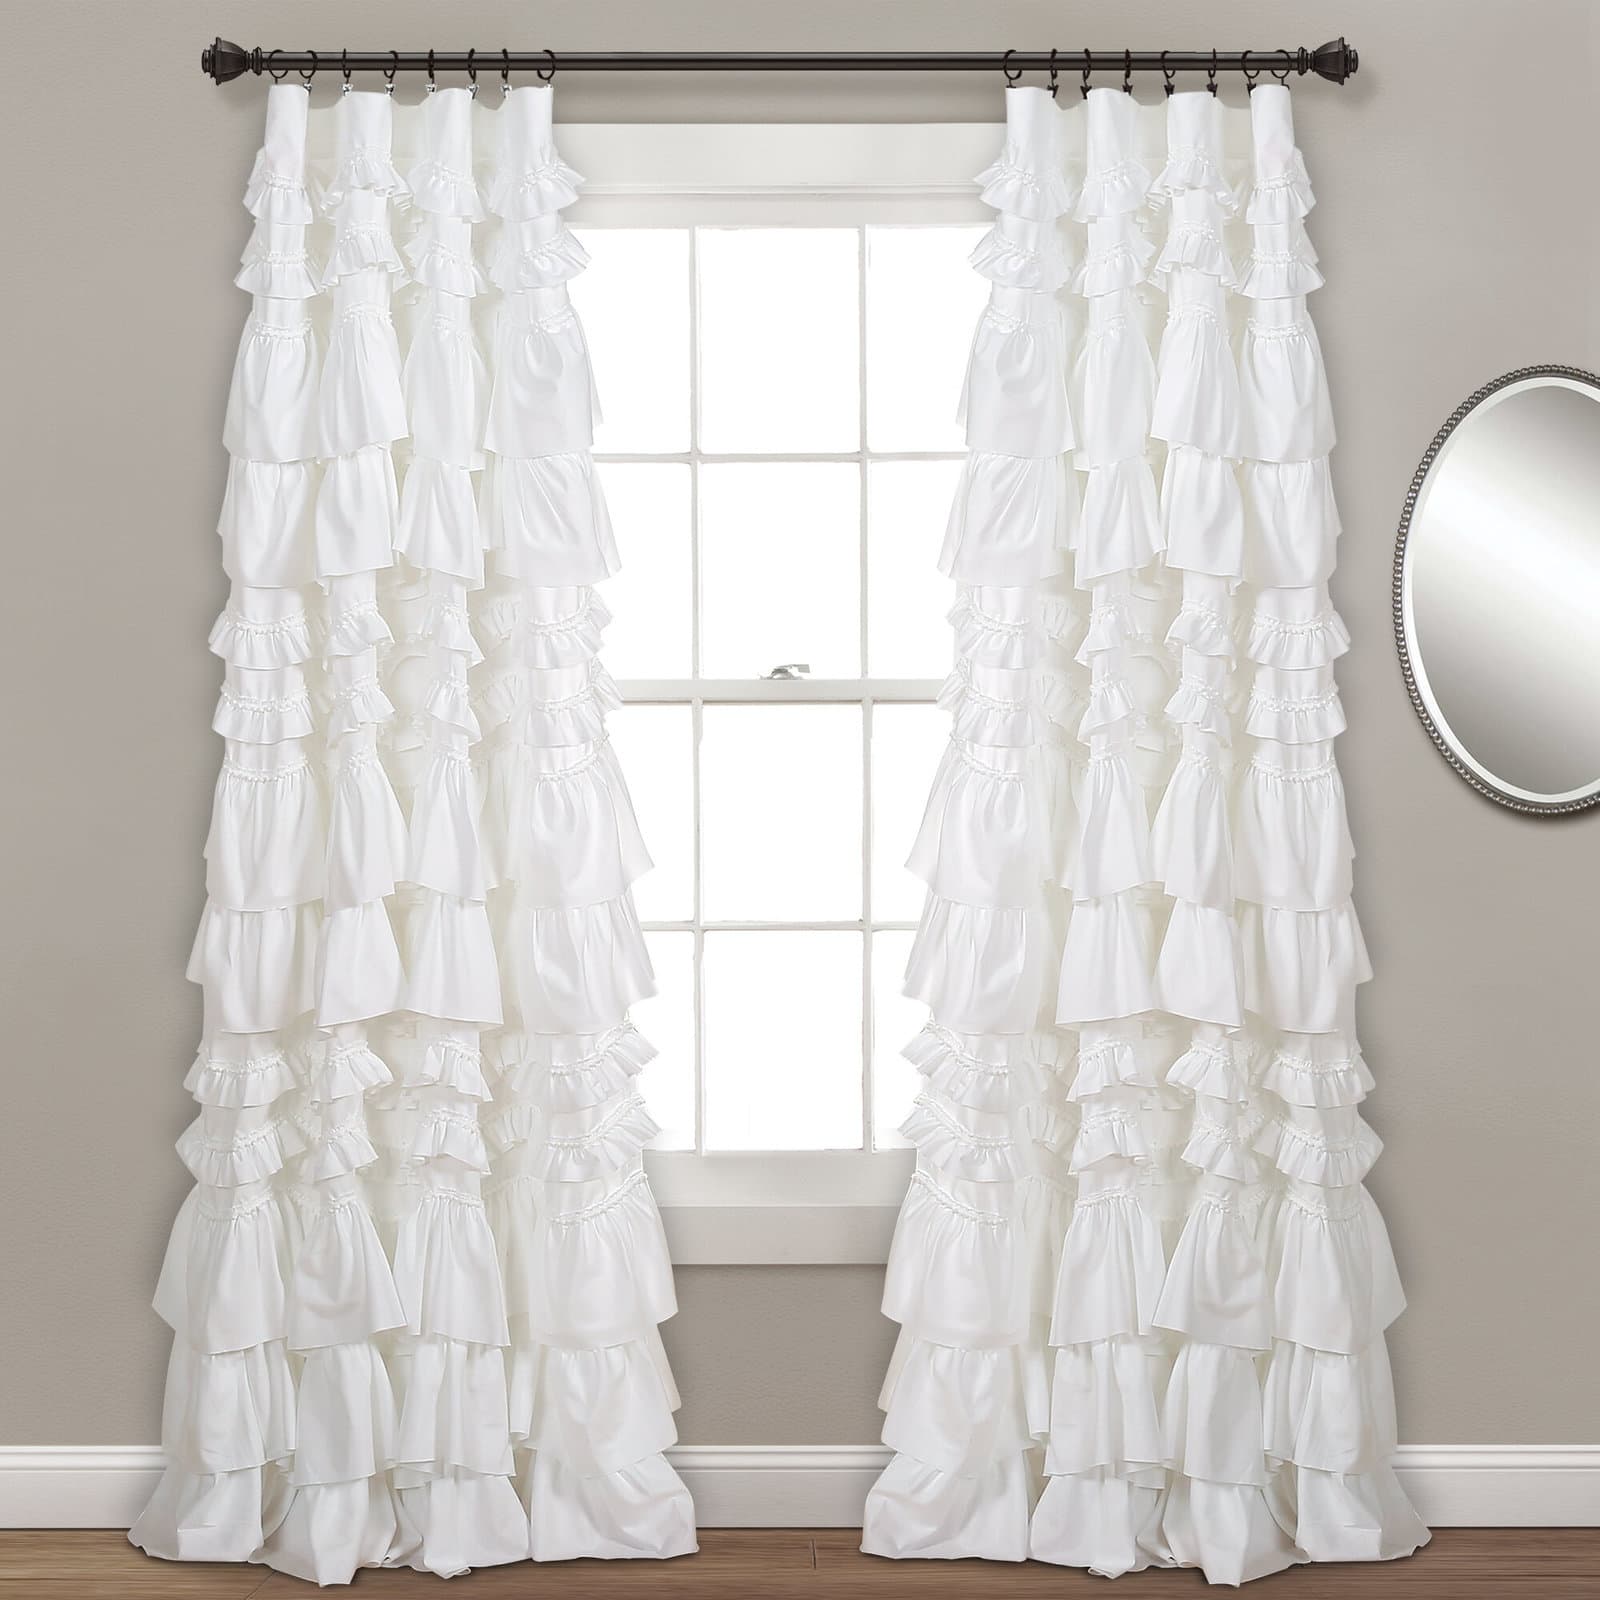 15 Try Ruffled Curtains For Unique Textures In the Room